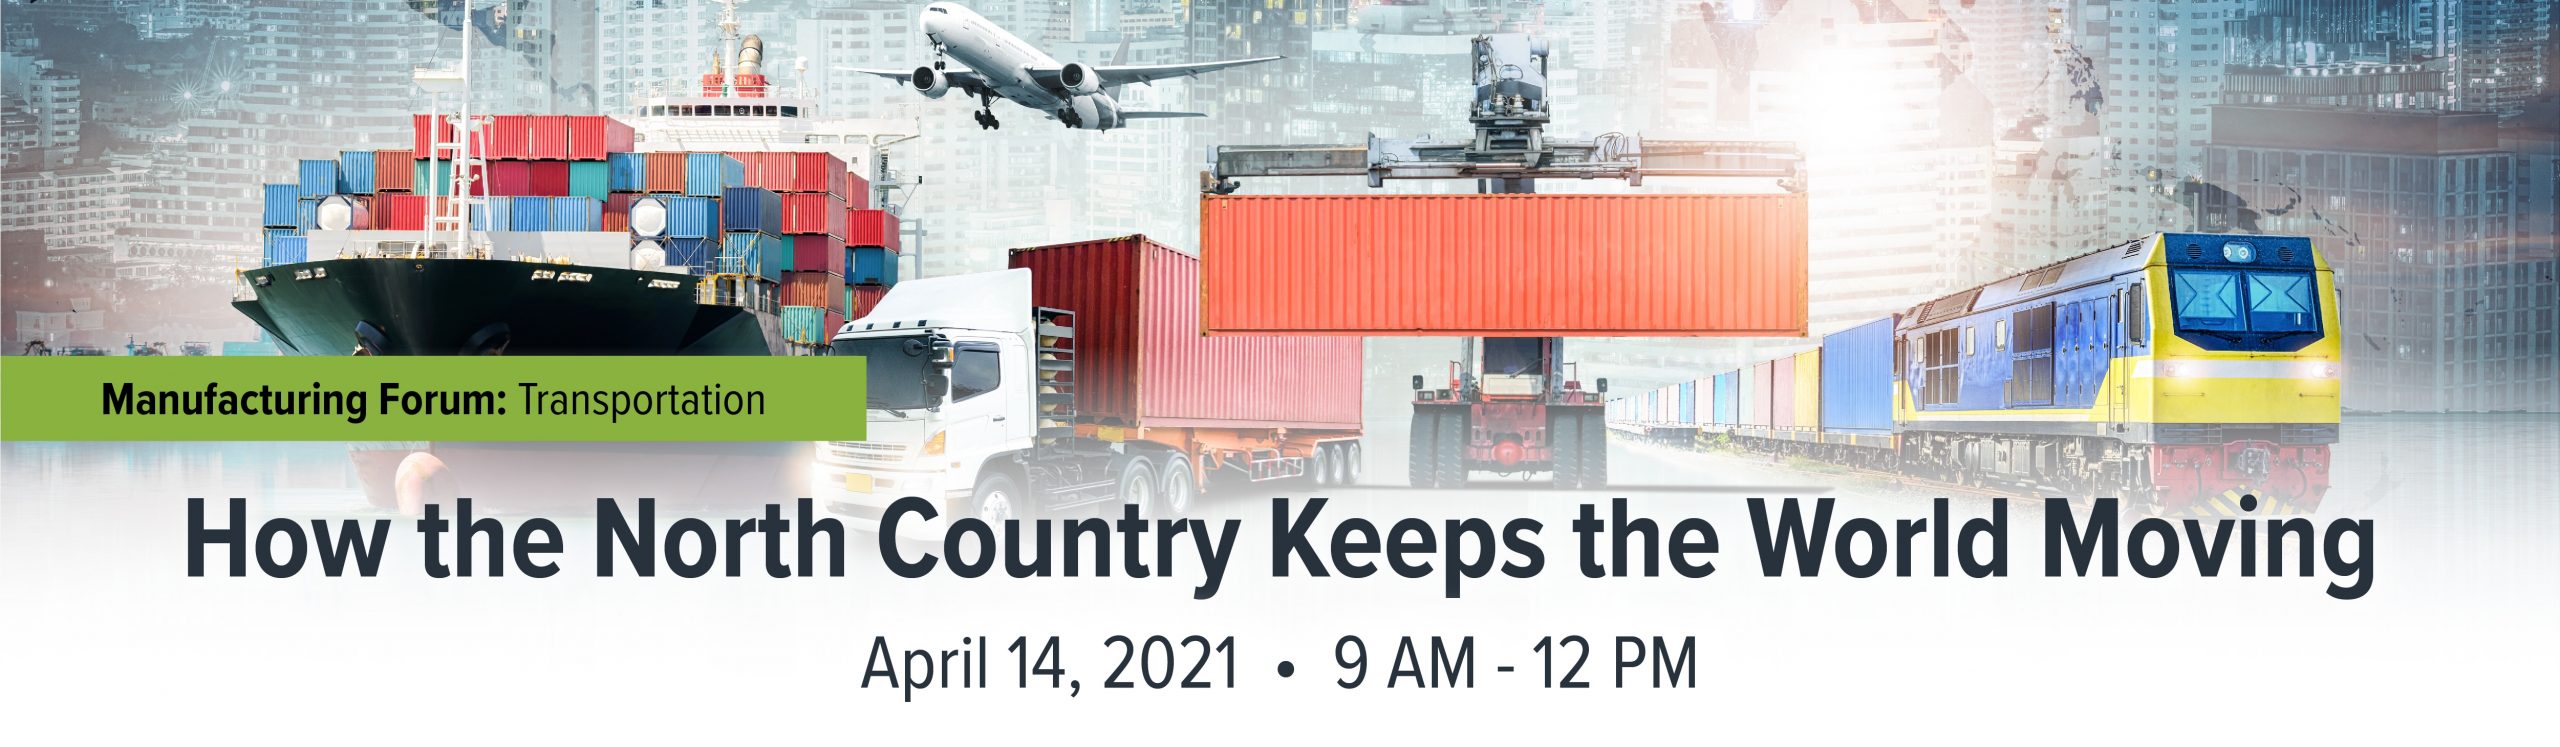 Banner ad for the "How the North Country Keeps the World Moving" event with a large container ship, a jet, a semi truck and a train in the background.